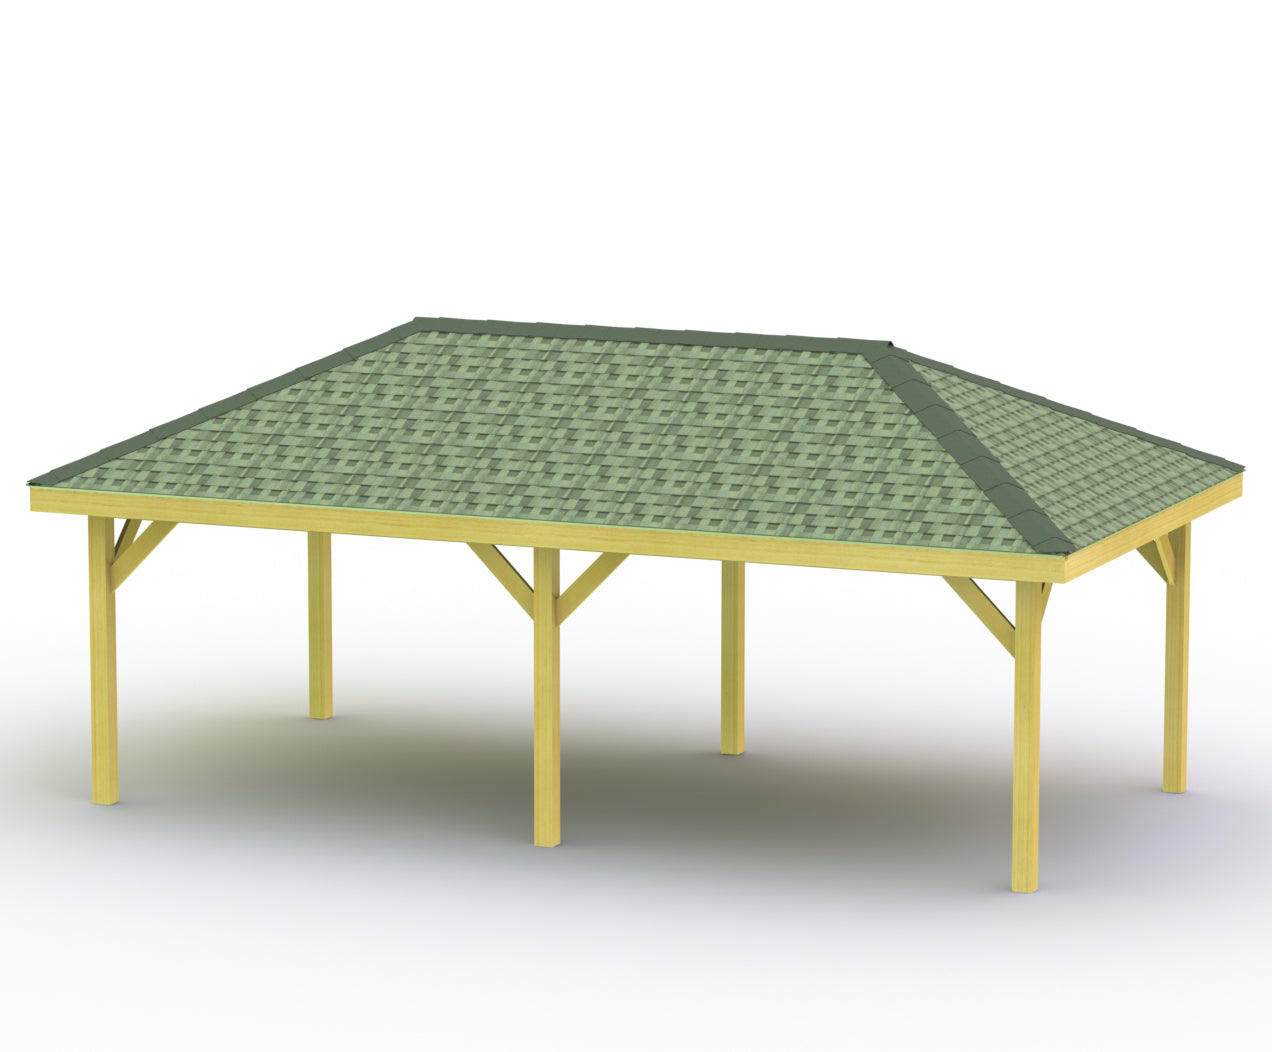 Hip Roof Gazebo Building Plans-Perfect for Hot Tubs - 12' x 24'